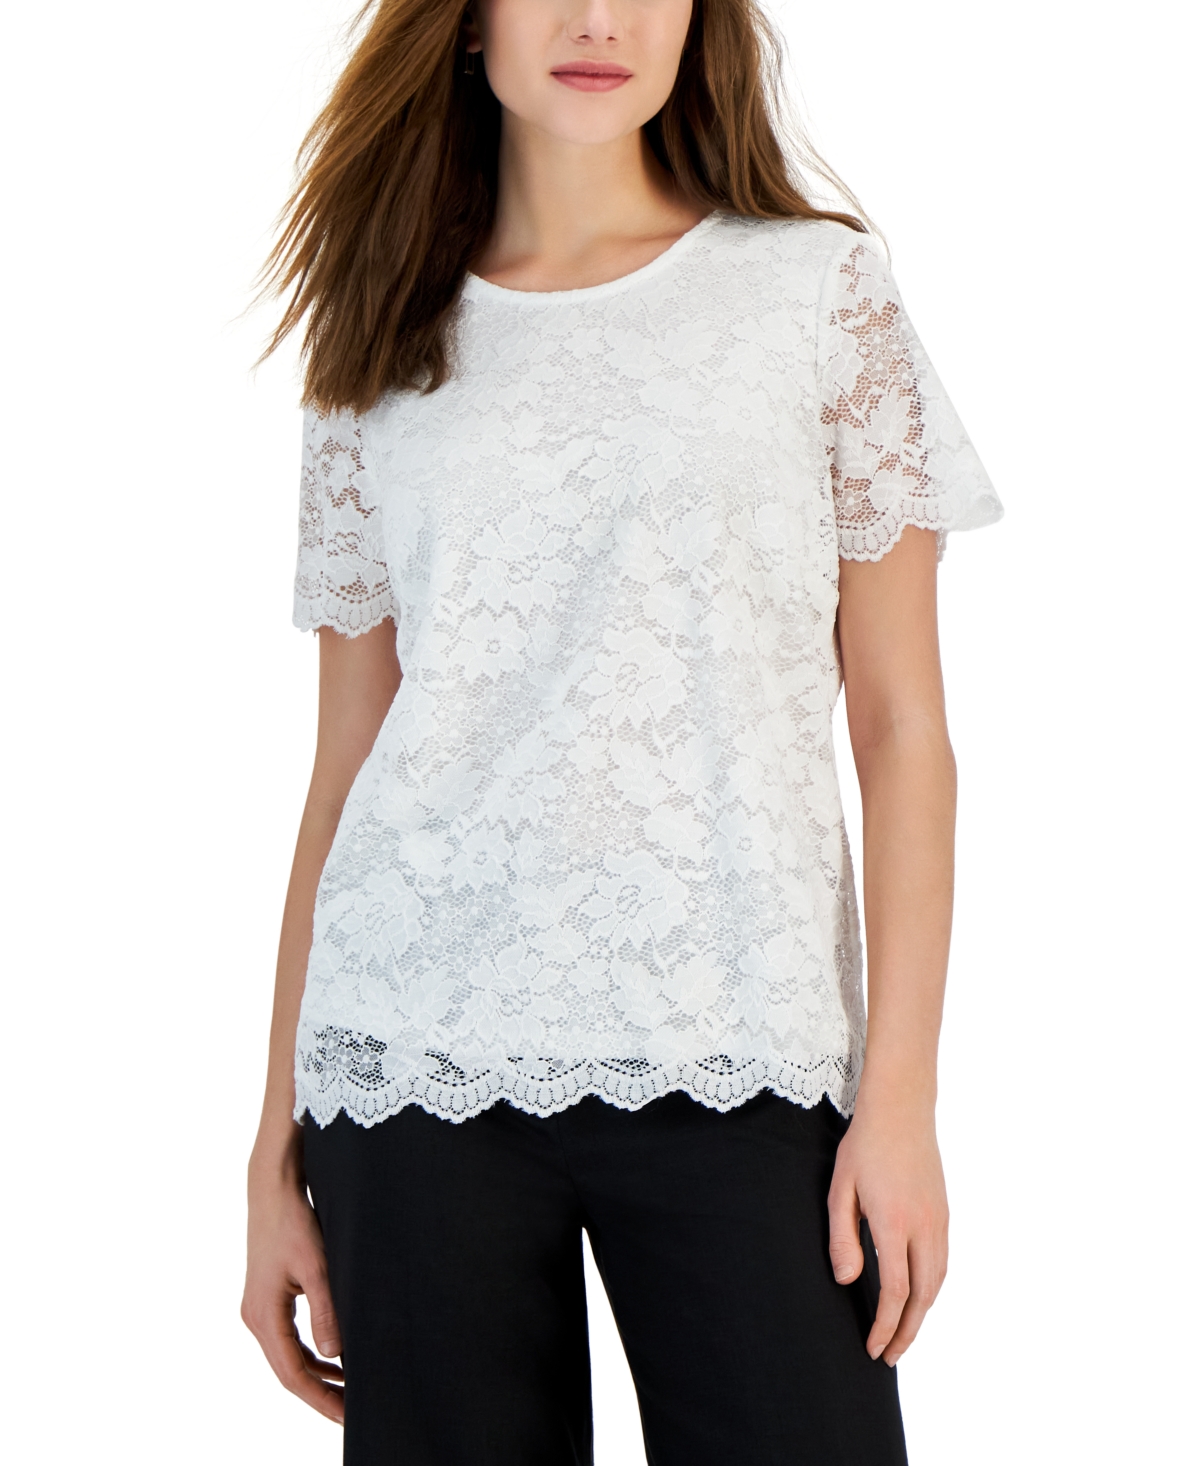 Women's Lace Short-Sleeve Top - Ivory